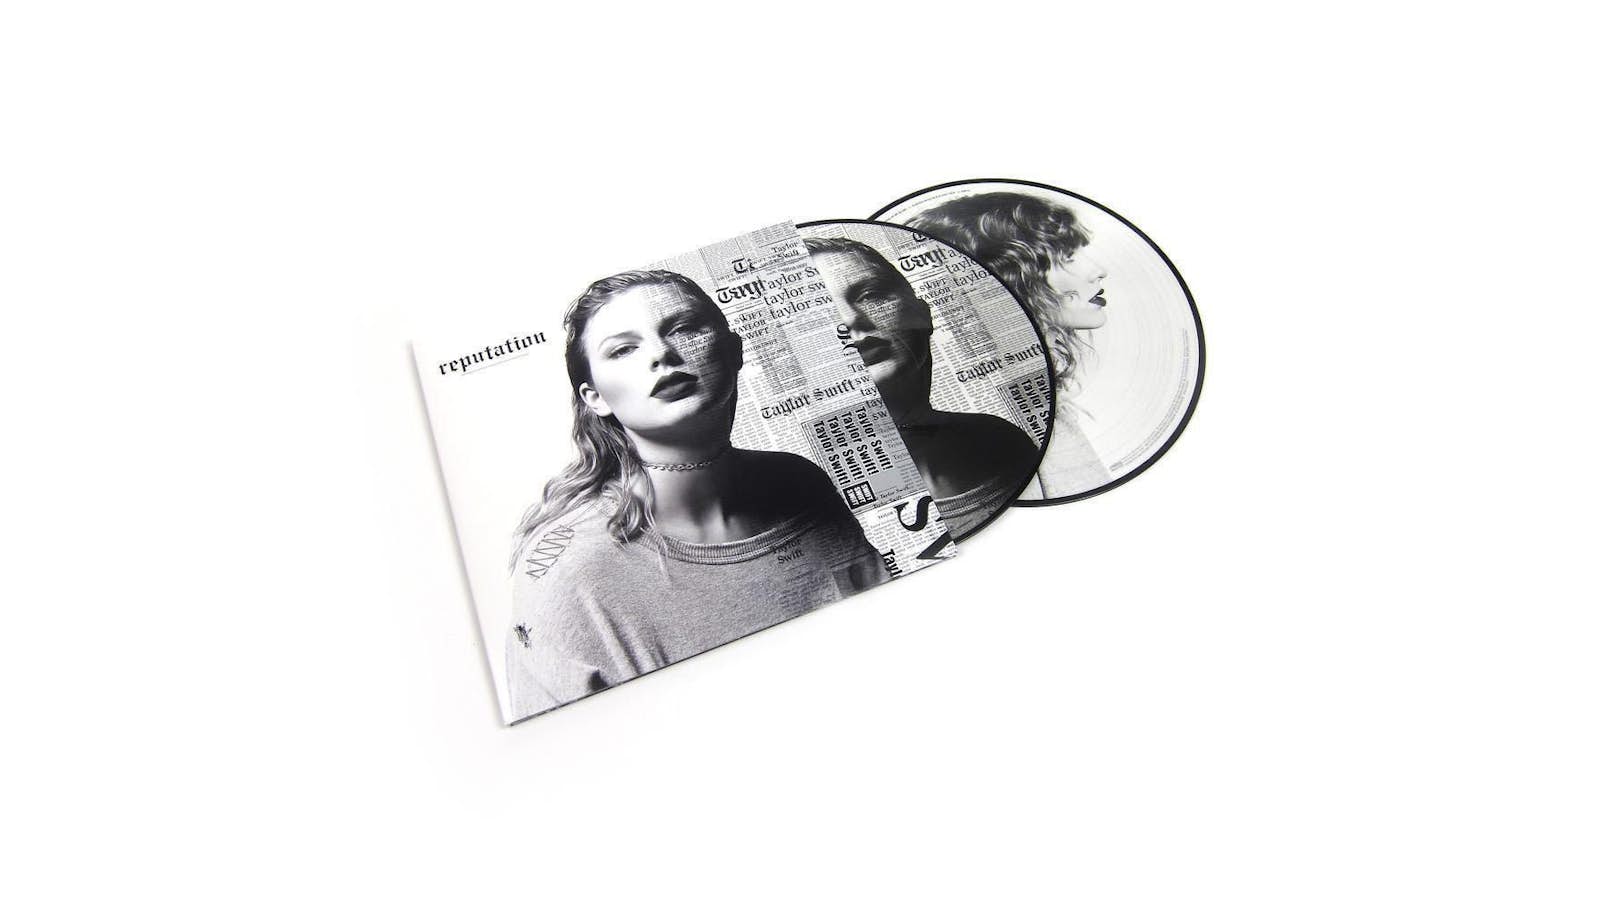 TAYLOR SWIFT 】REPUTATION - 2XLP PICTURE VINYL RECORD LIMITED EDITION - NEW  843930033157